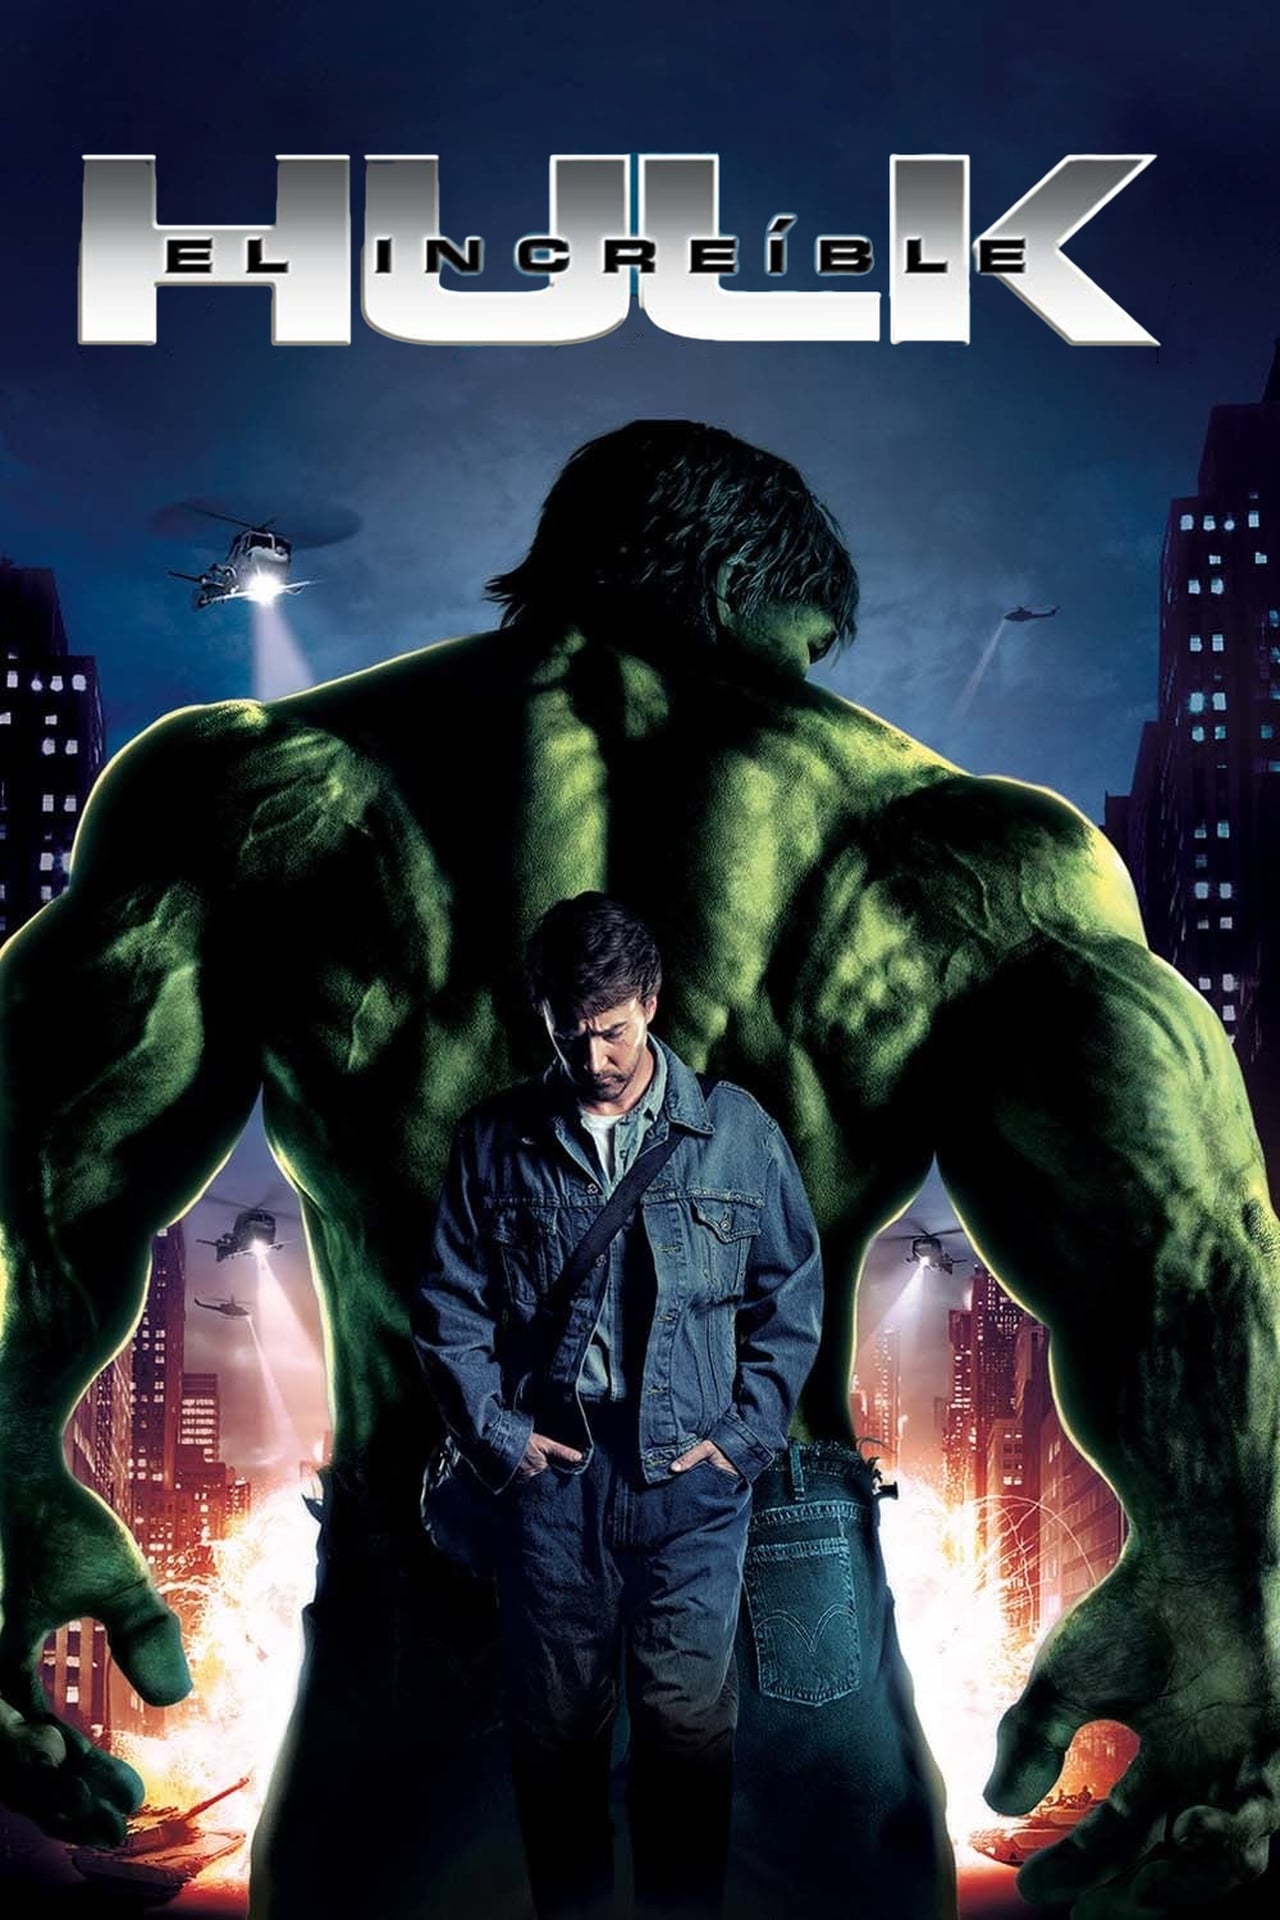 The Incredible Hulk wiki, synopsis, reviews, watch and download